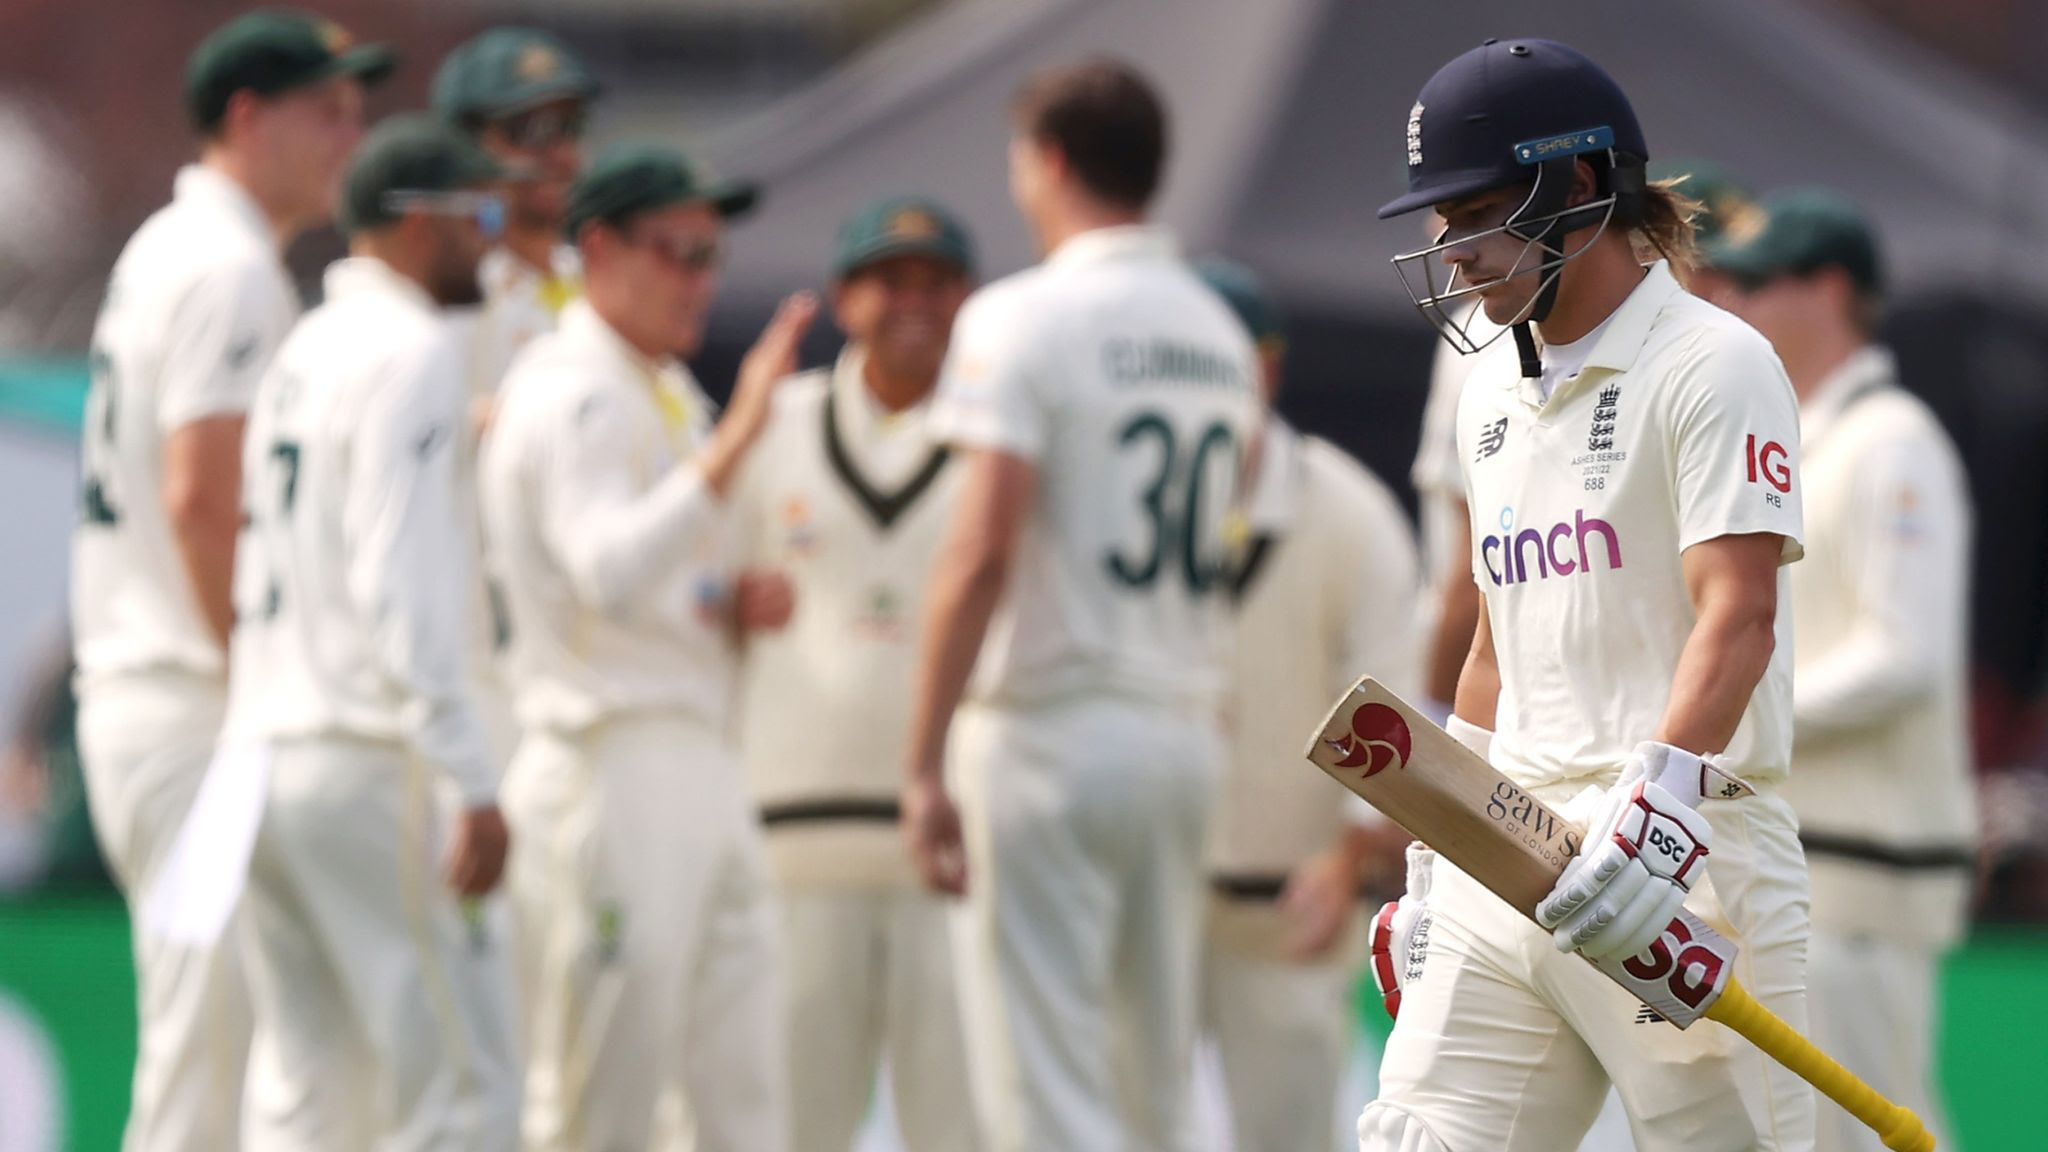 The Ashes: Another batting slump leaves England in trouble despite late wickets in Hobart